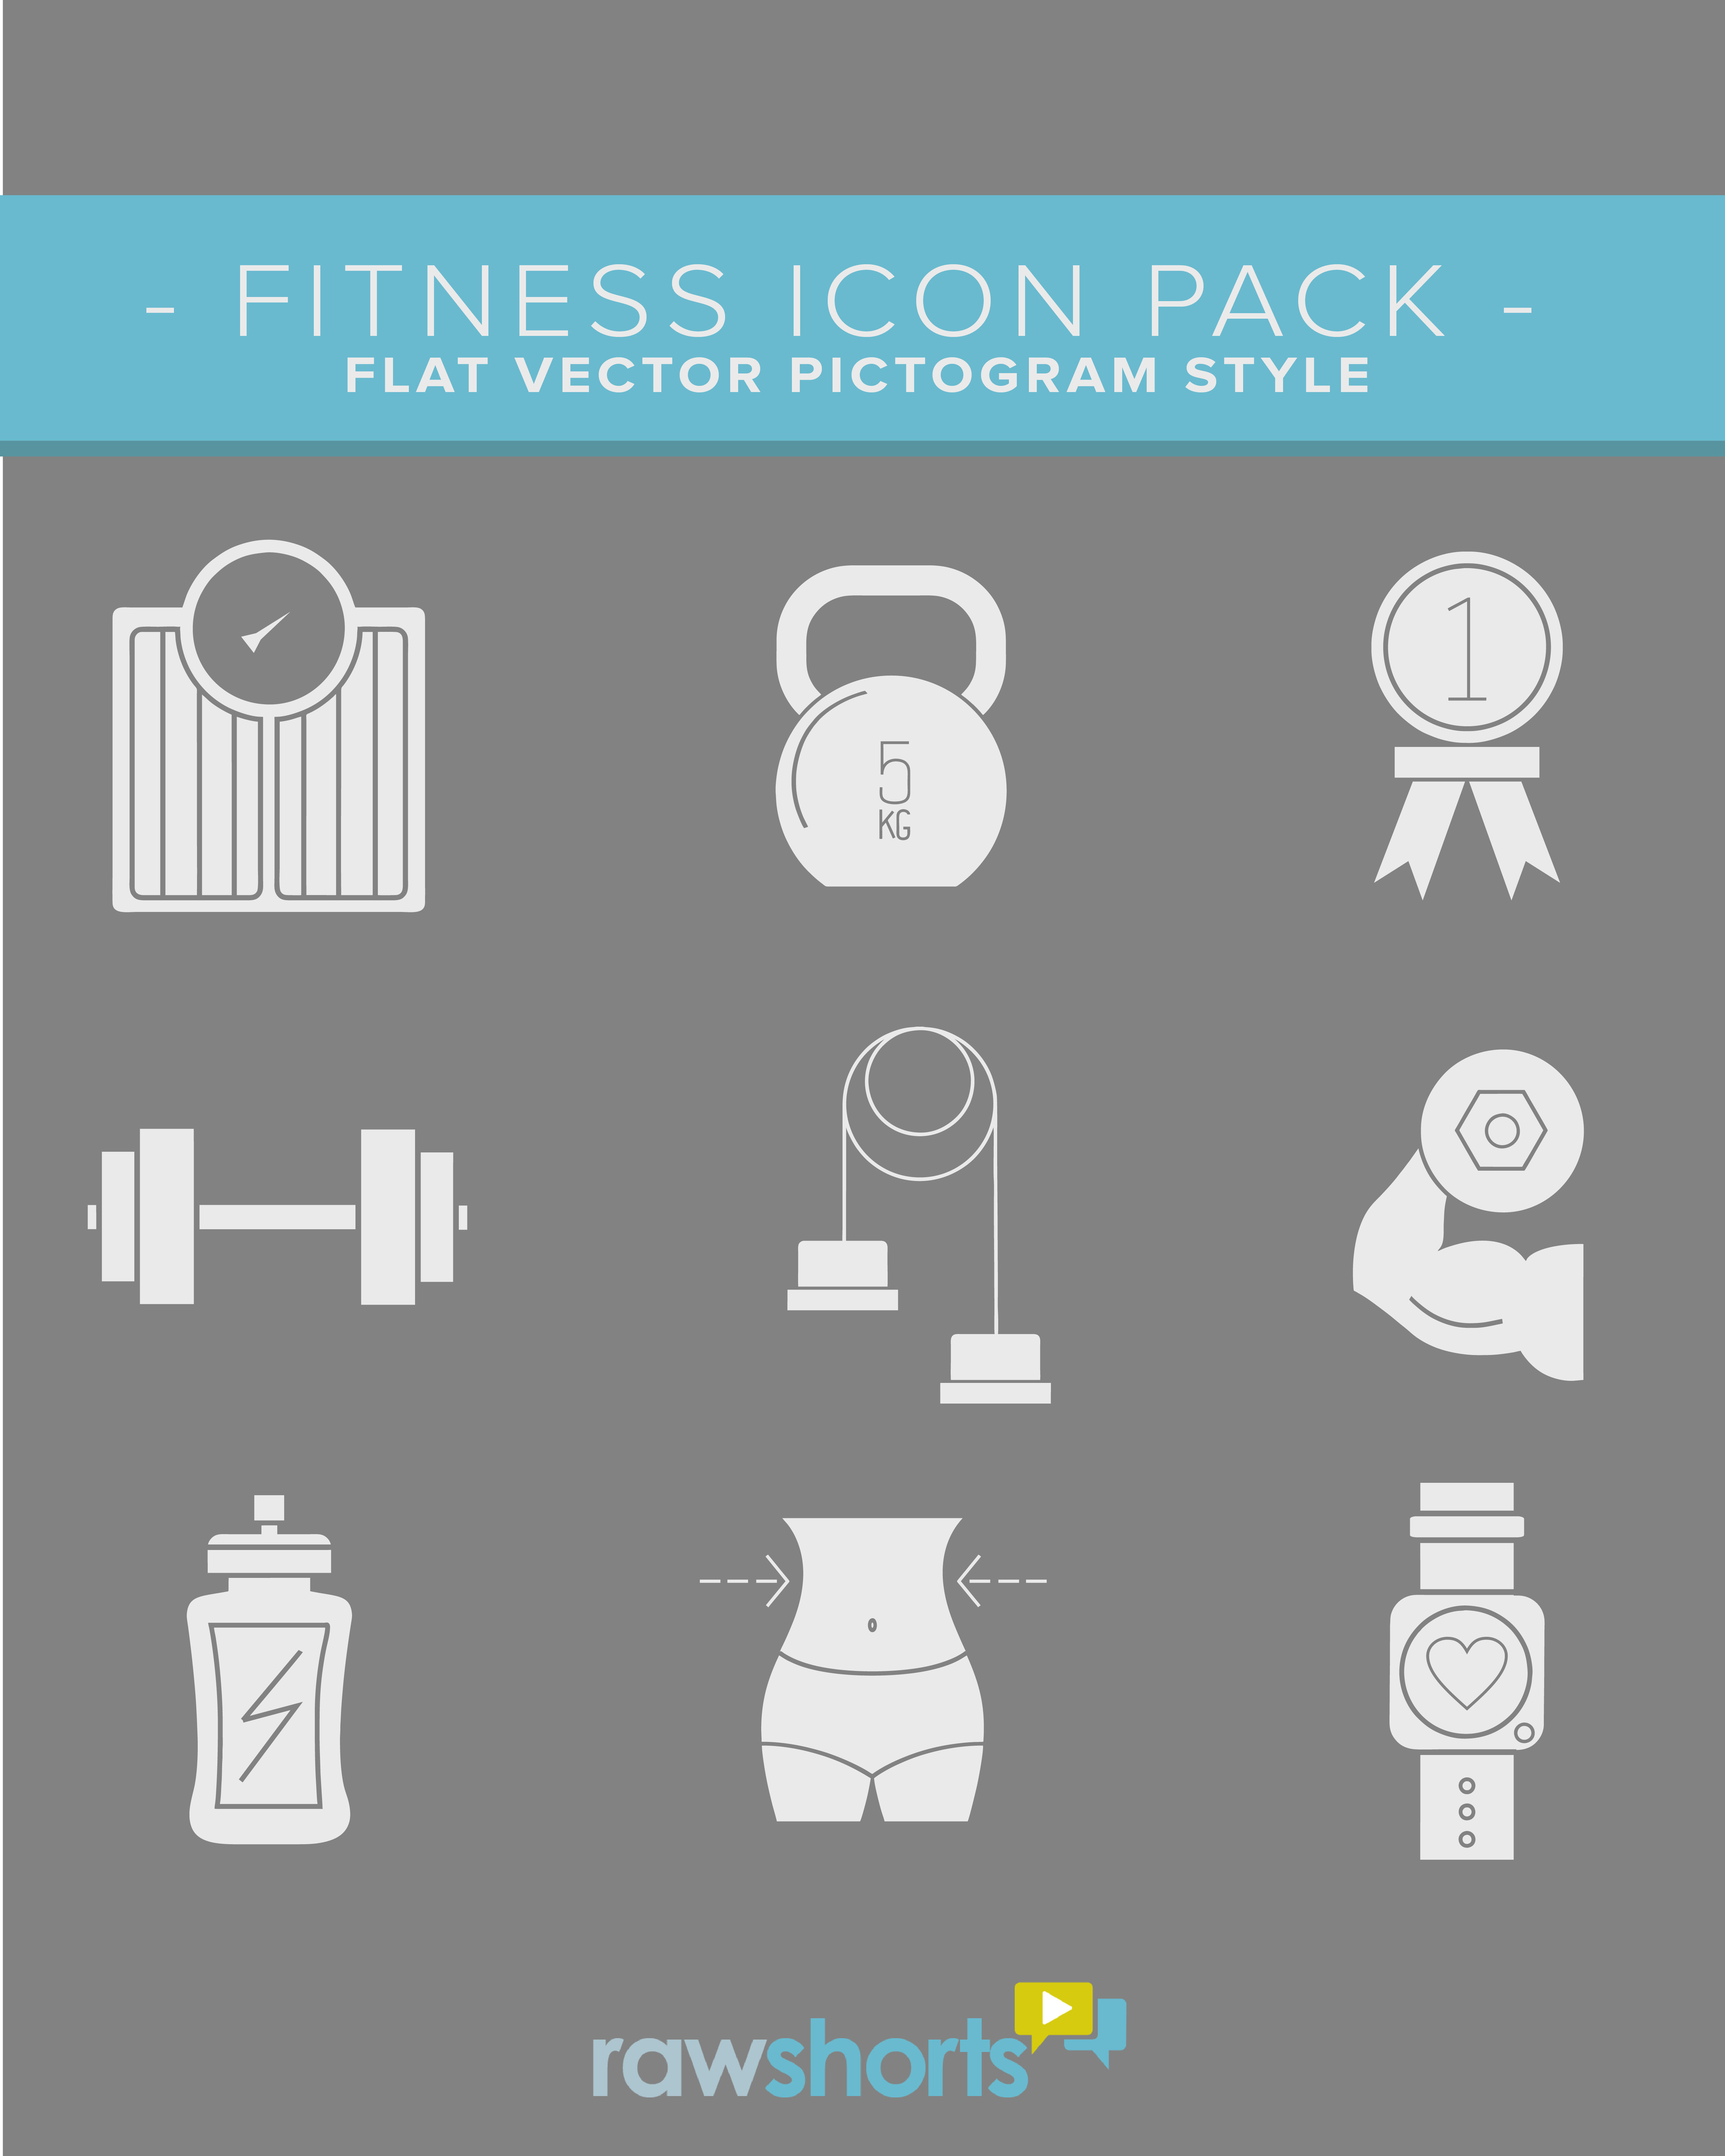 Fitness icon pack